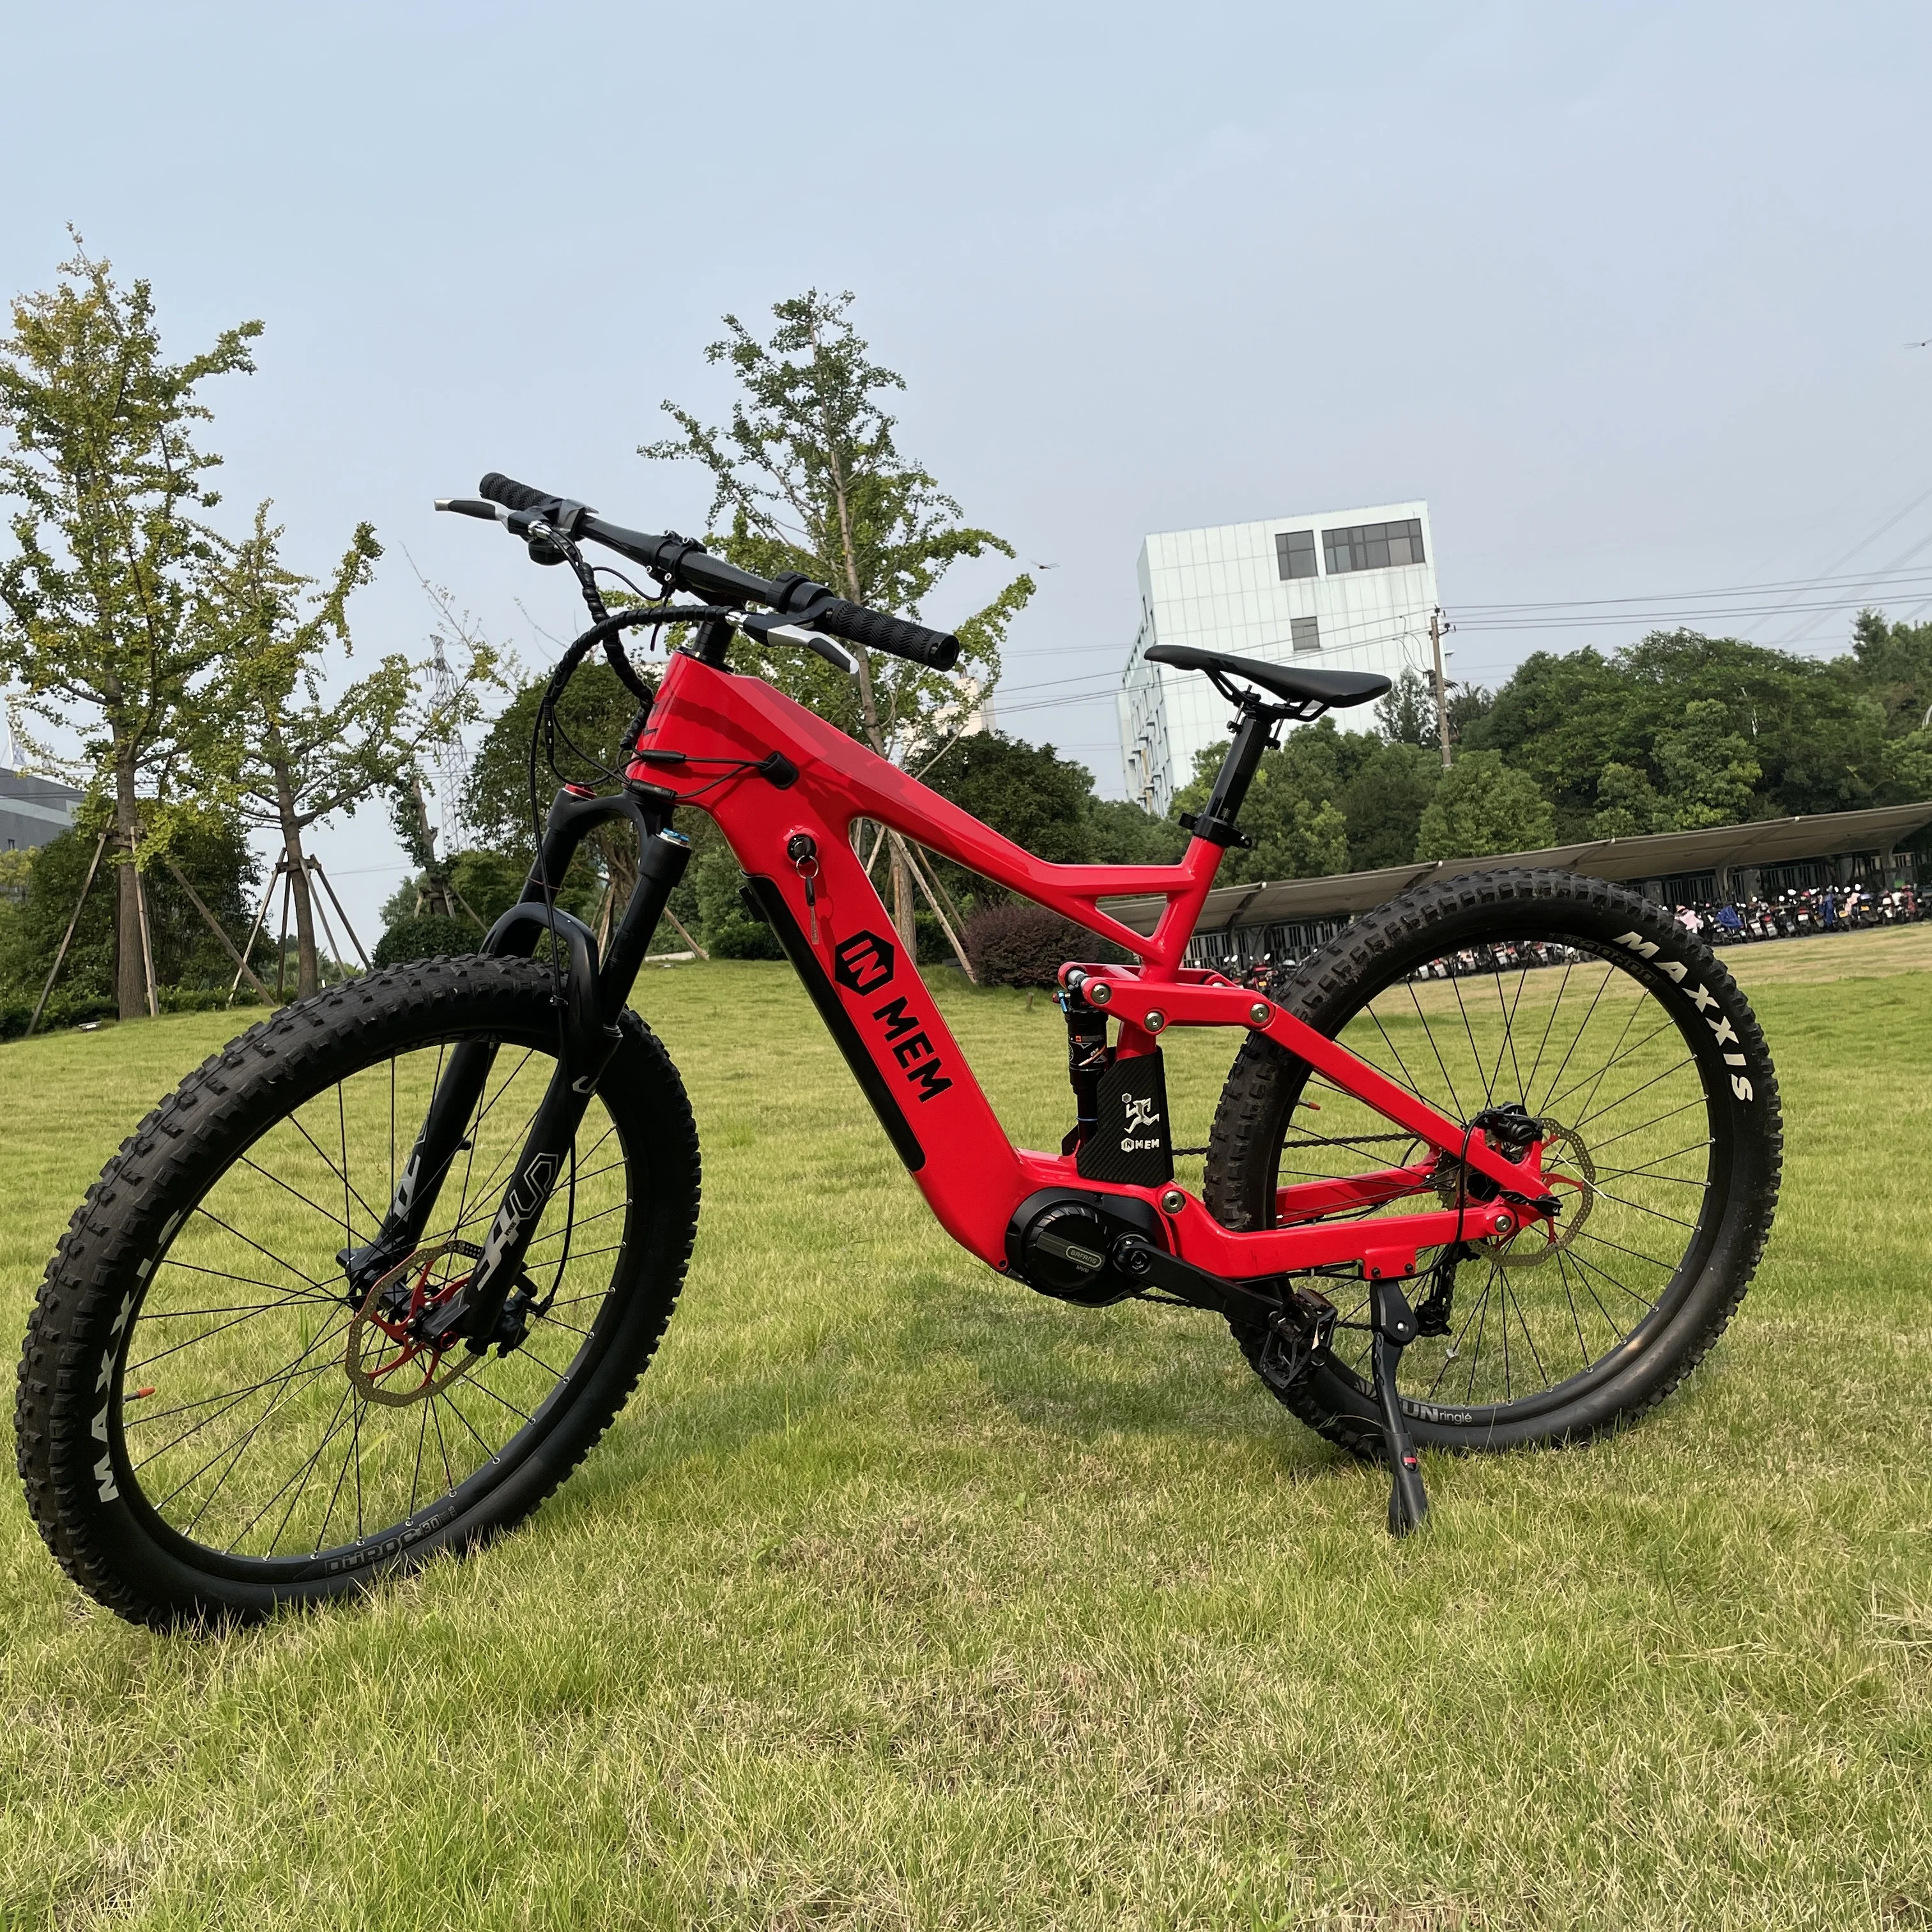 

2021 Newest 48V 14Ah Electric Bike All terrain 500W Mid Drive Motor electric Bicycle Mountain MTB Full Suspension Ebike PRO, Customizable